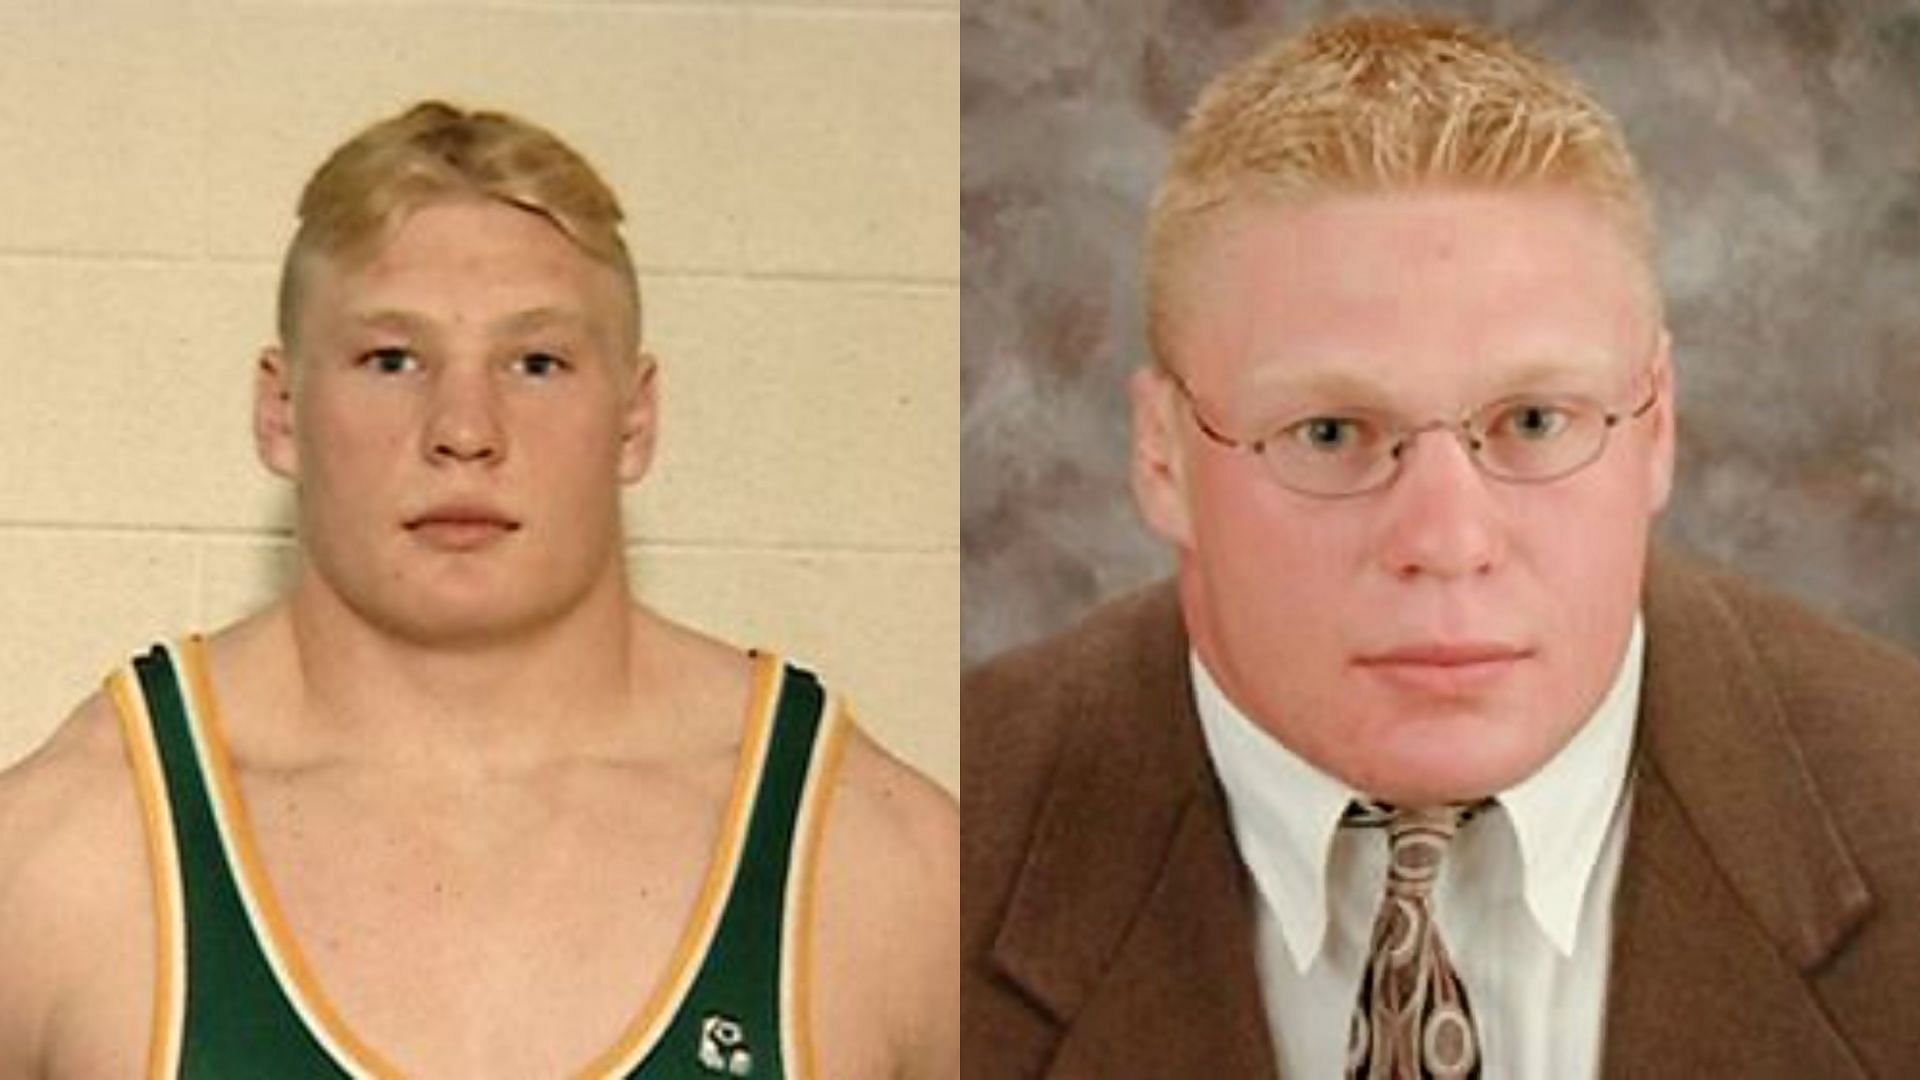 Brock Lesnar signed up for the Army National Guard when he was in high school